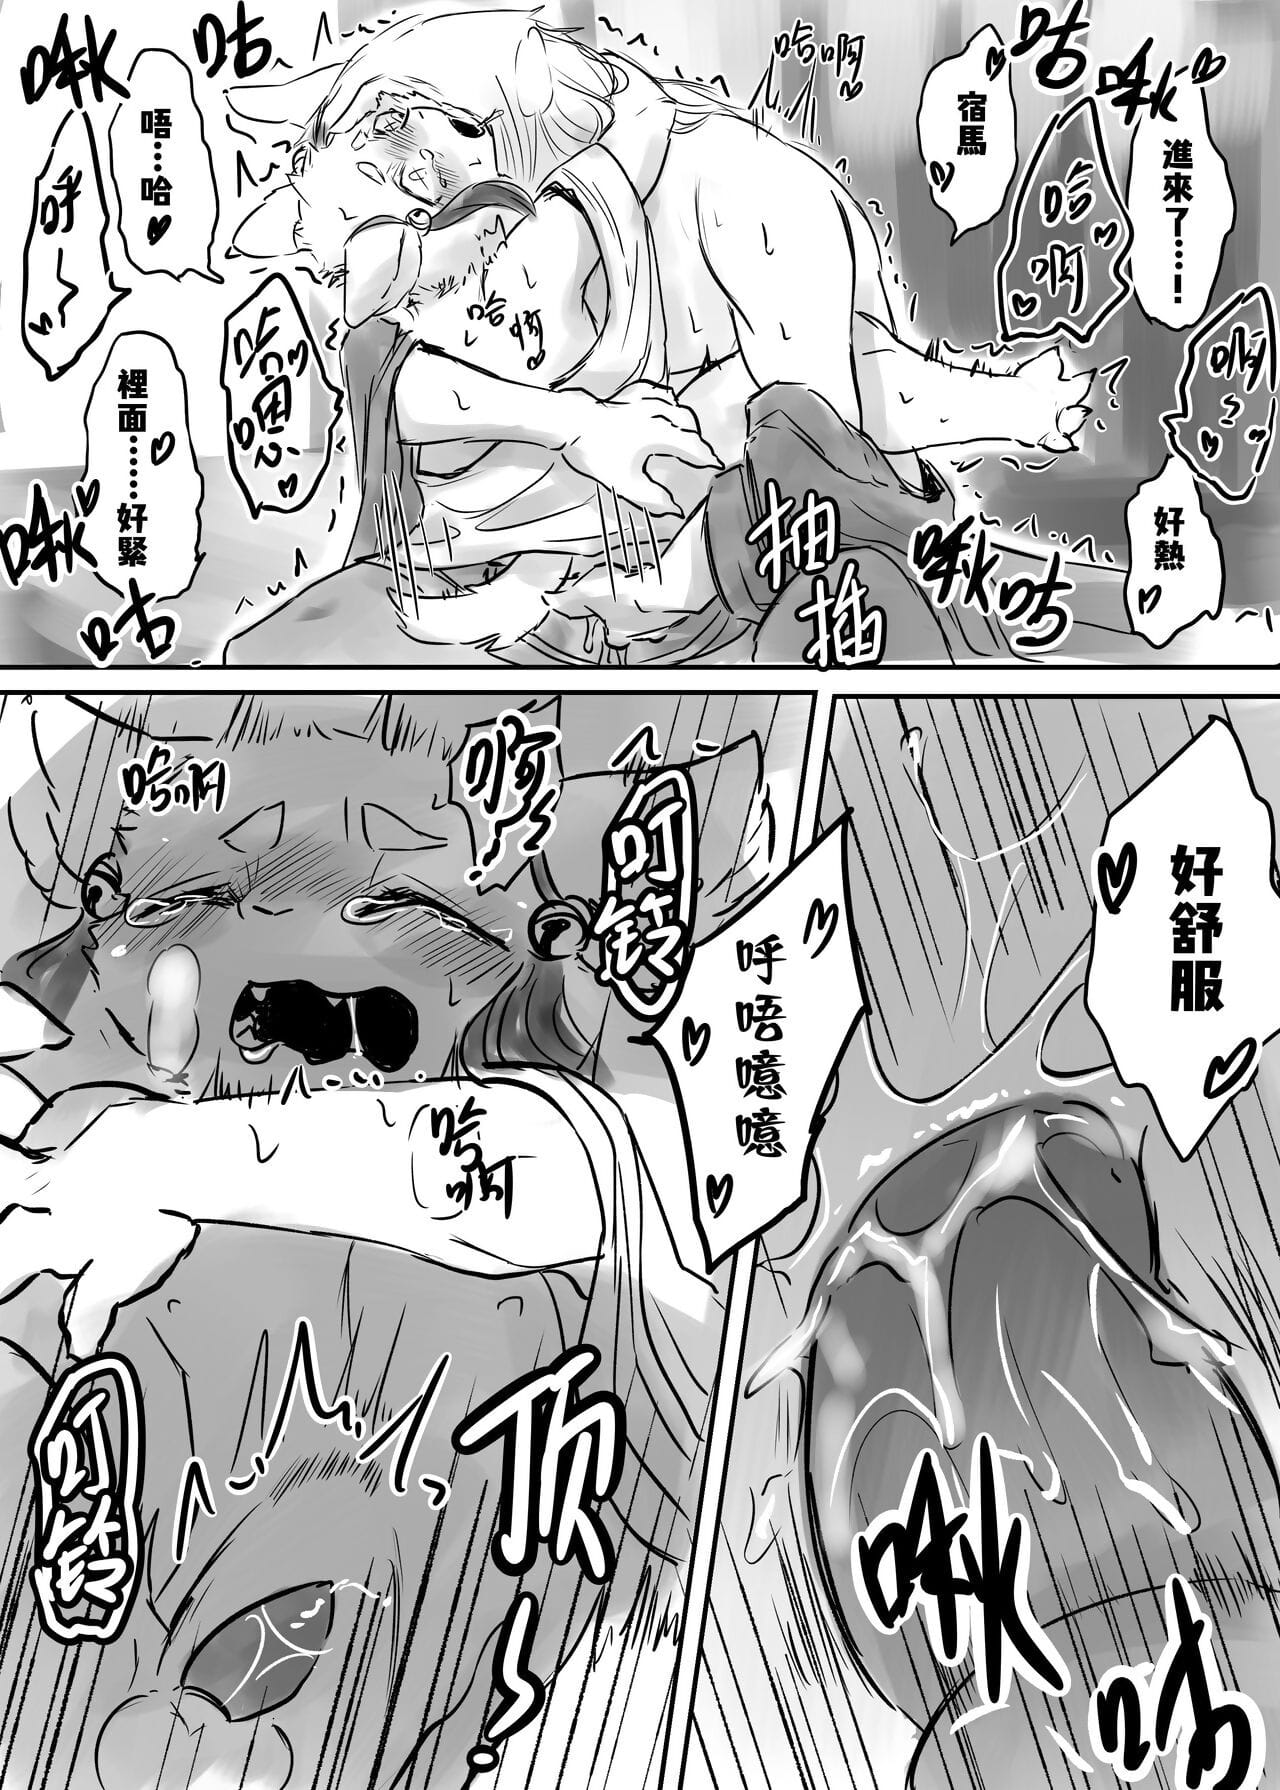 （the زائر 他乡之人 by：鬼流 جزء 3 page 1